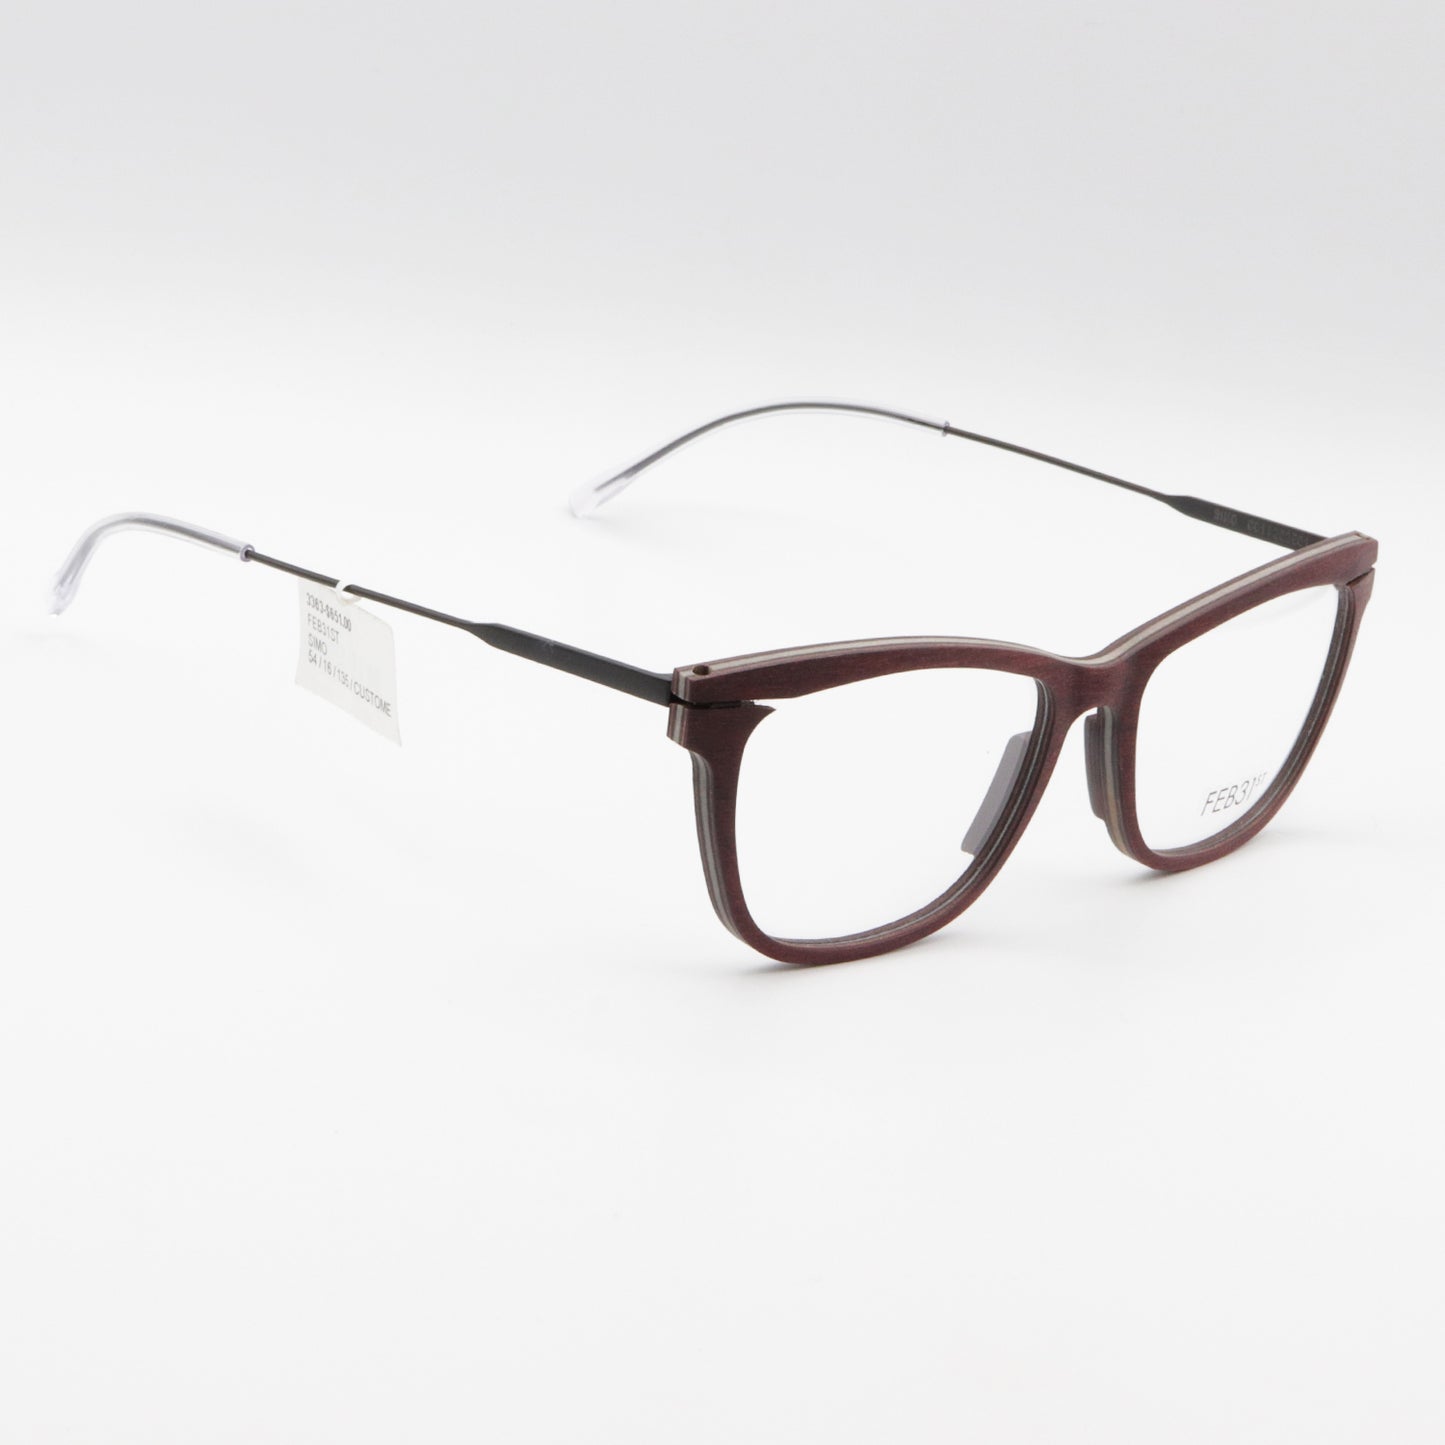 Simo by FEB31st wooden glasses Burgundy Brown